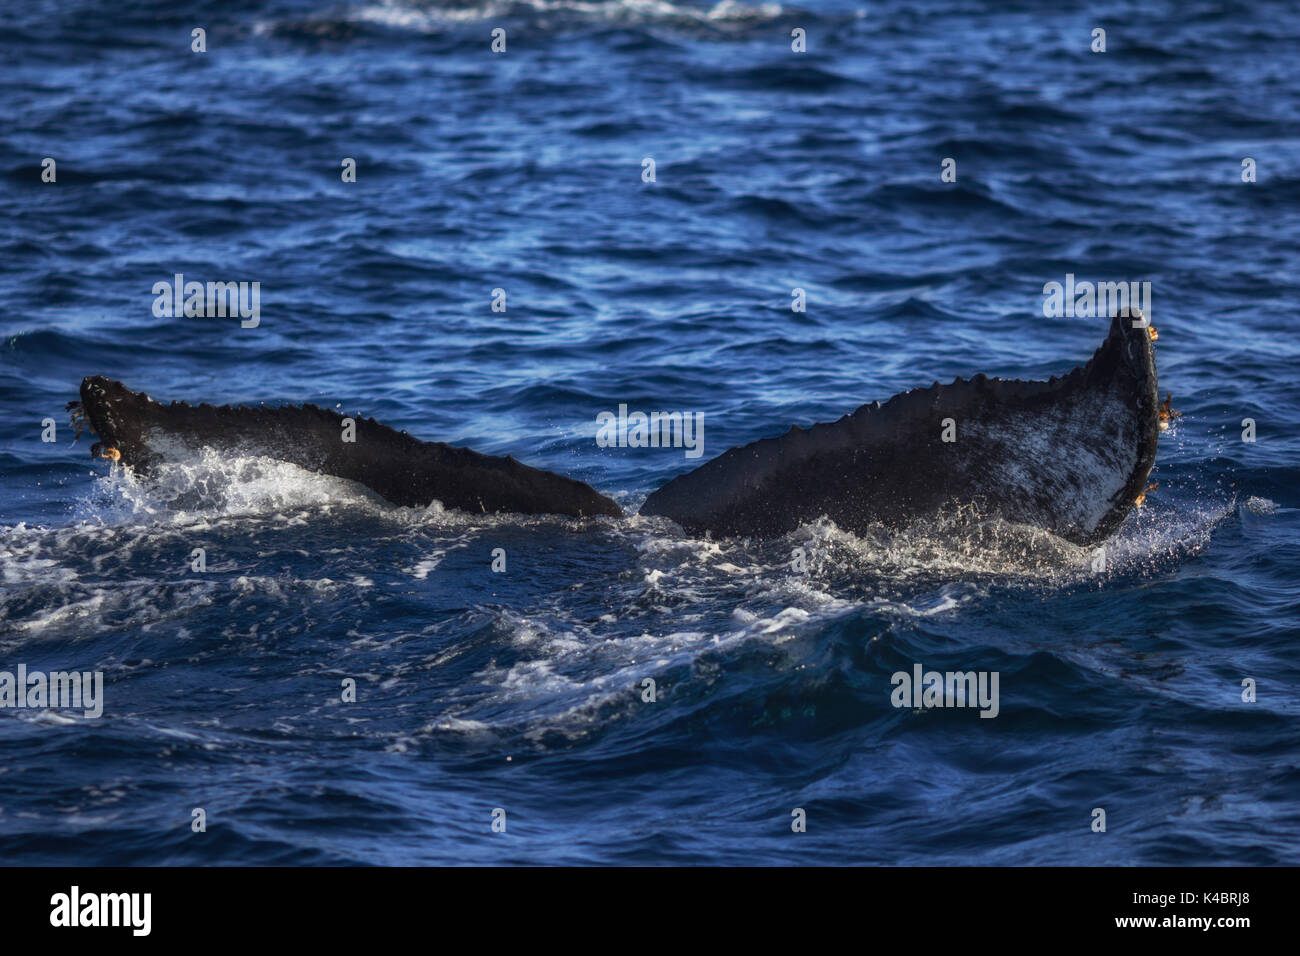 Humpback whale tail going under the surface of the pacific ocean off the coast of southern California. Stock Photo